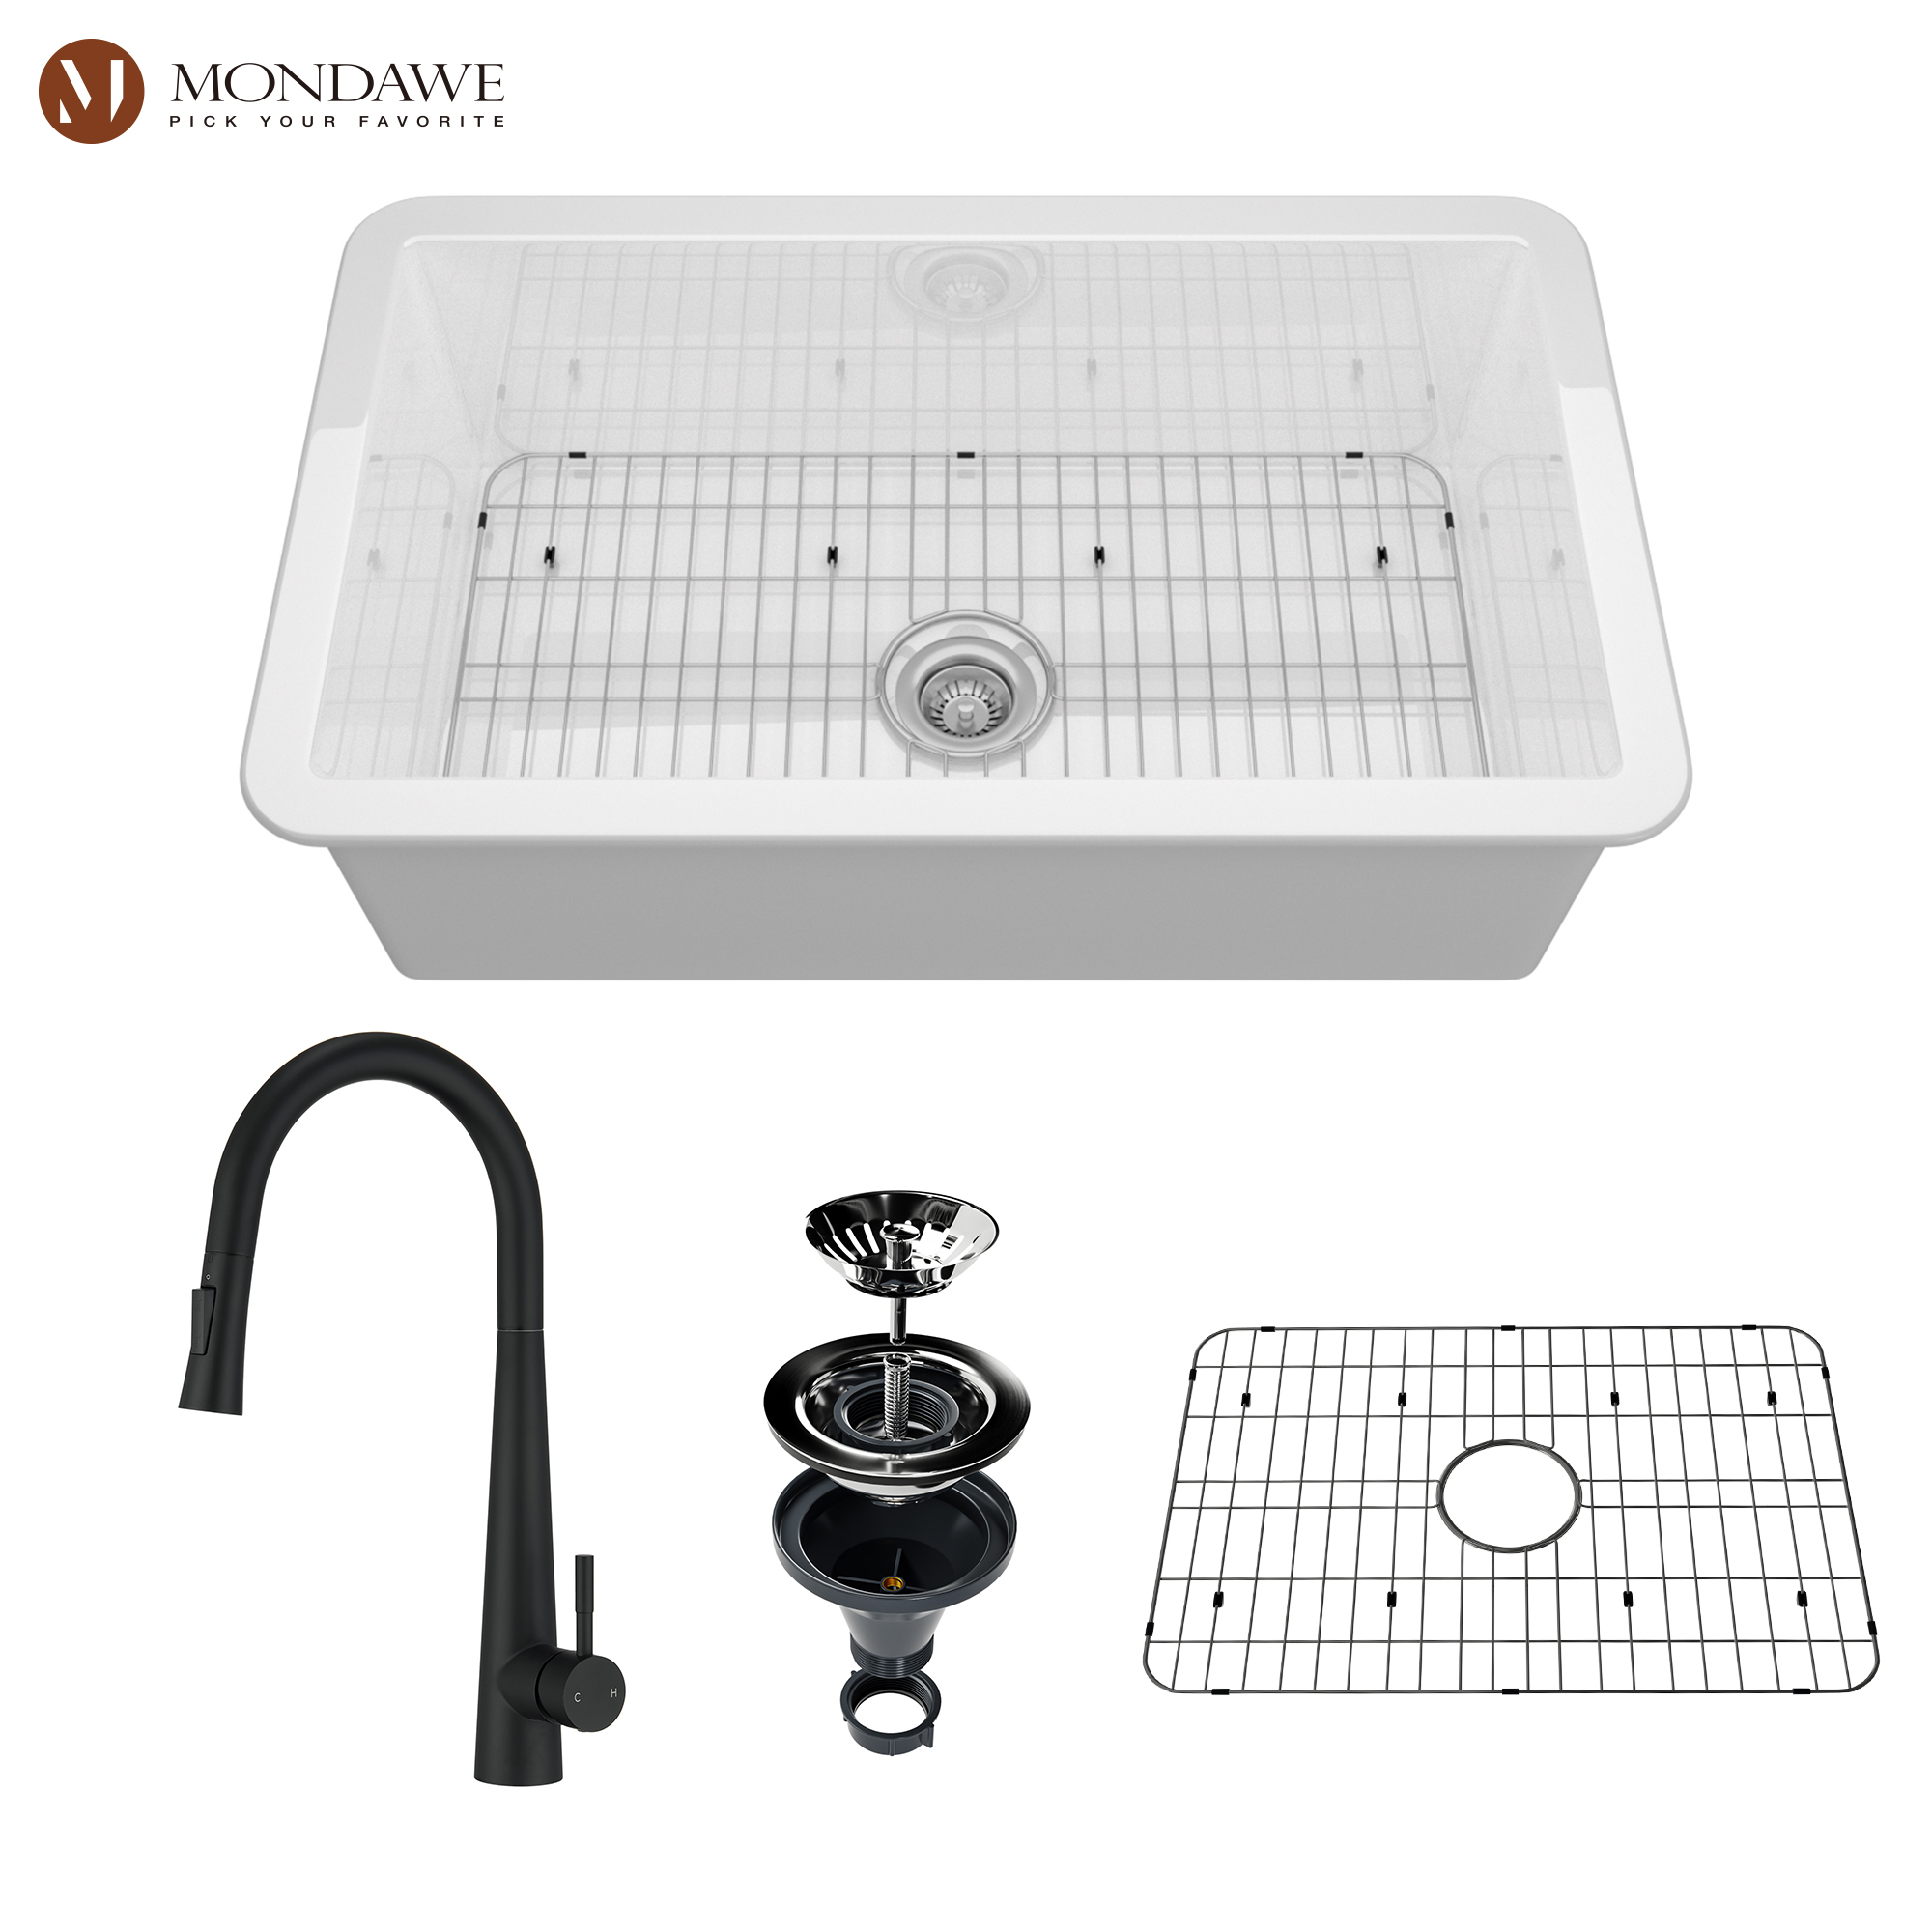 Undermount 32 in. single bowl fireclay kitchen sink in white comes with pull-down faucet-Mondawe